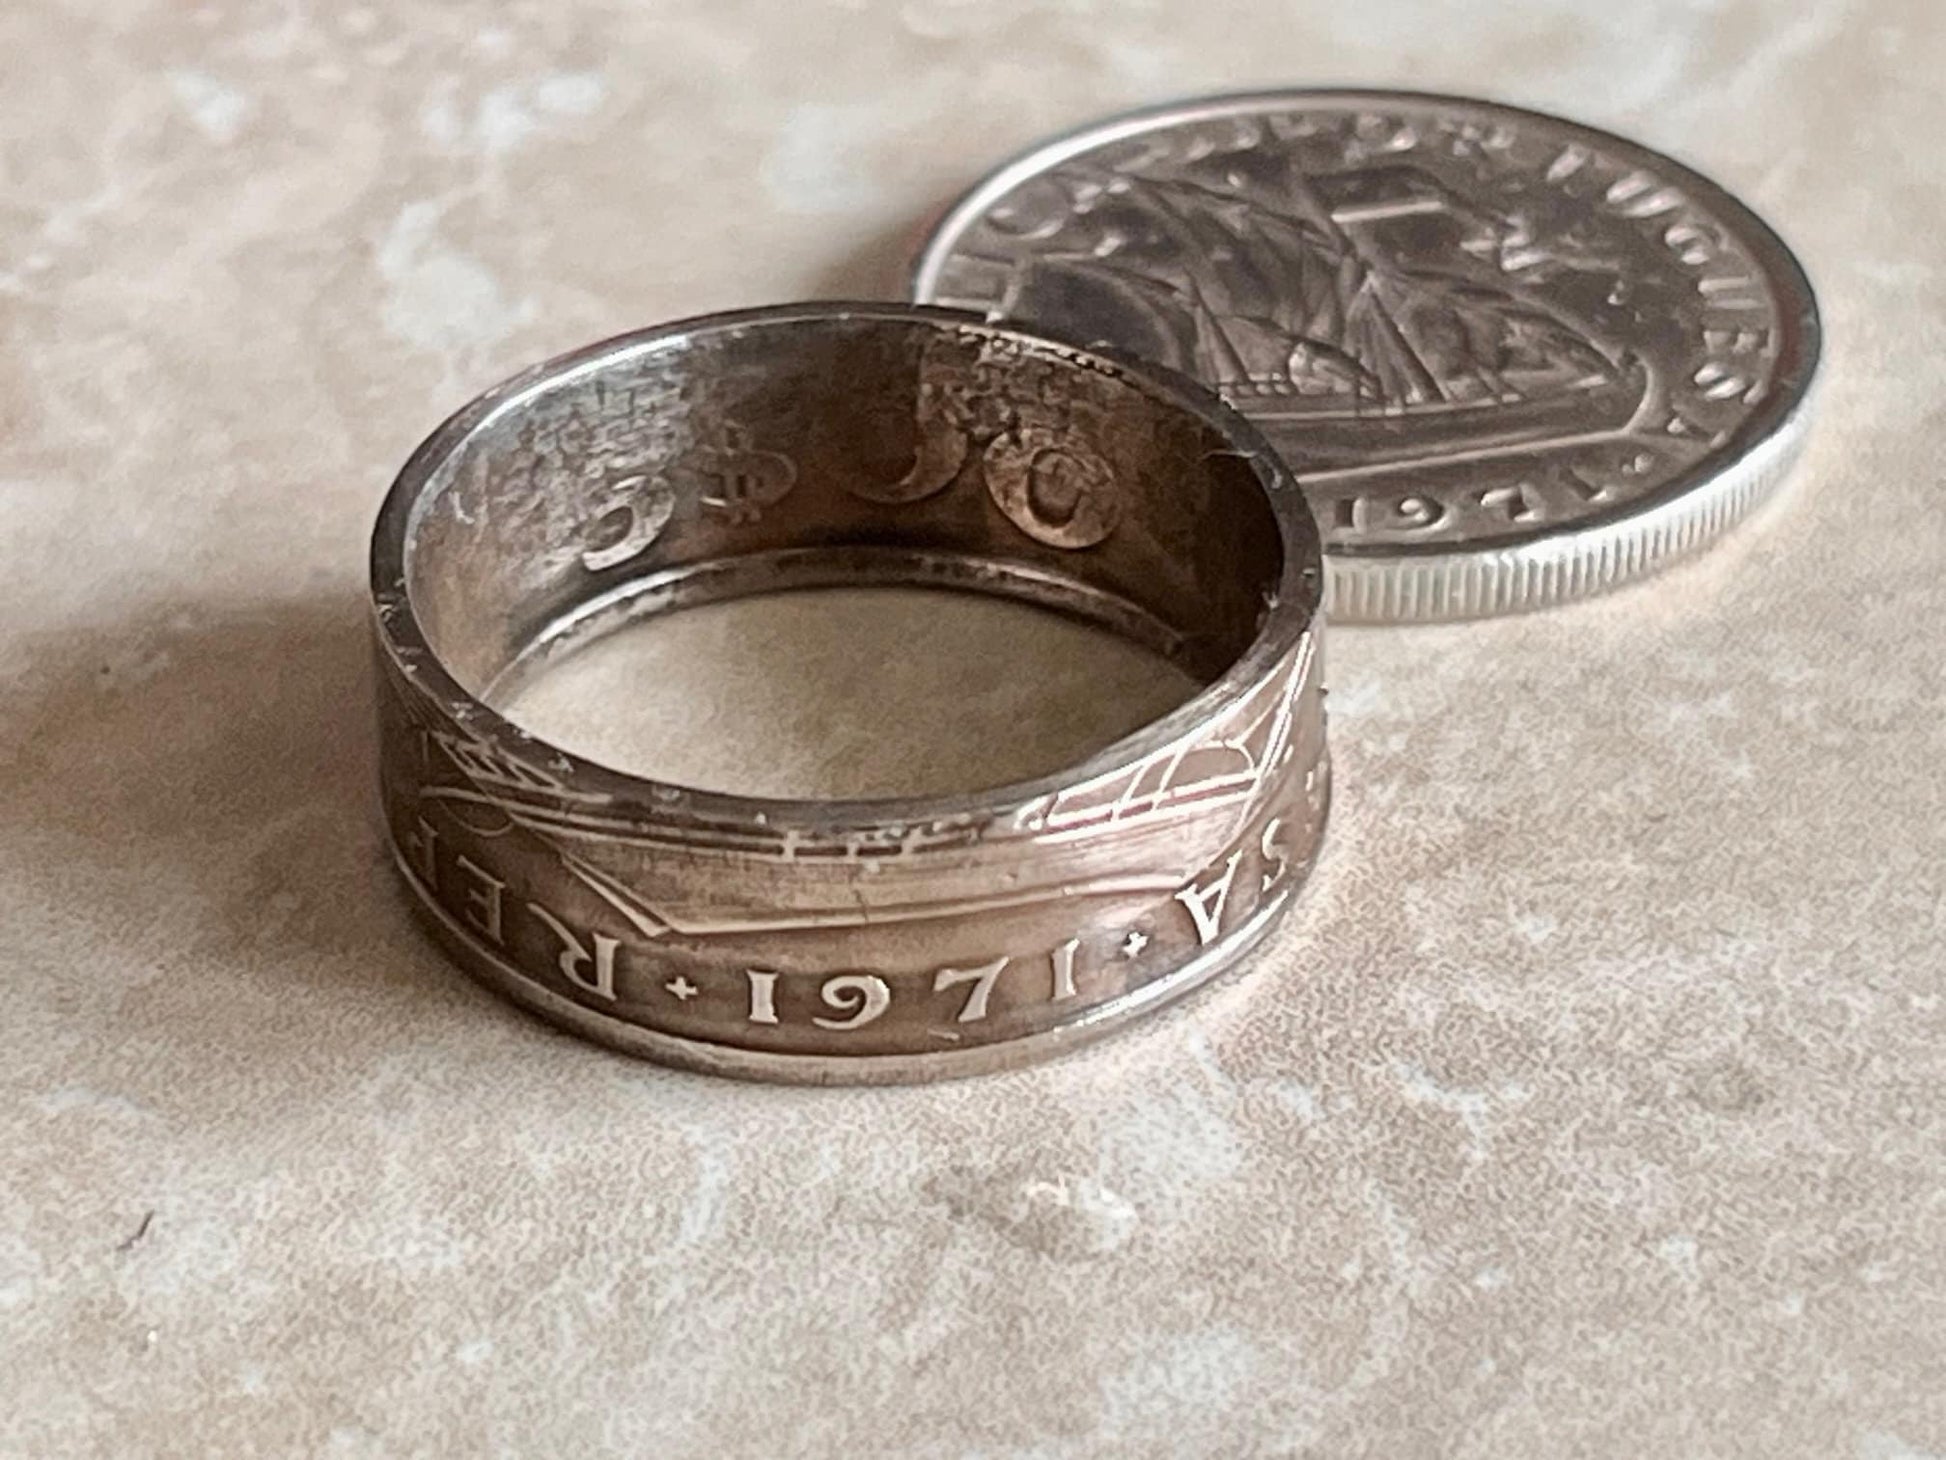 Portugal Coin Ring Republica Portuguese Handmade Custom Ring For Gift For Friend Coin Ring Gift For Him, Her, Coin Collector, World Coins